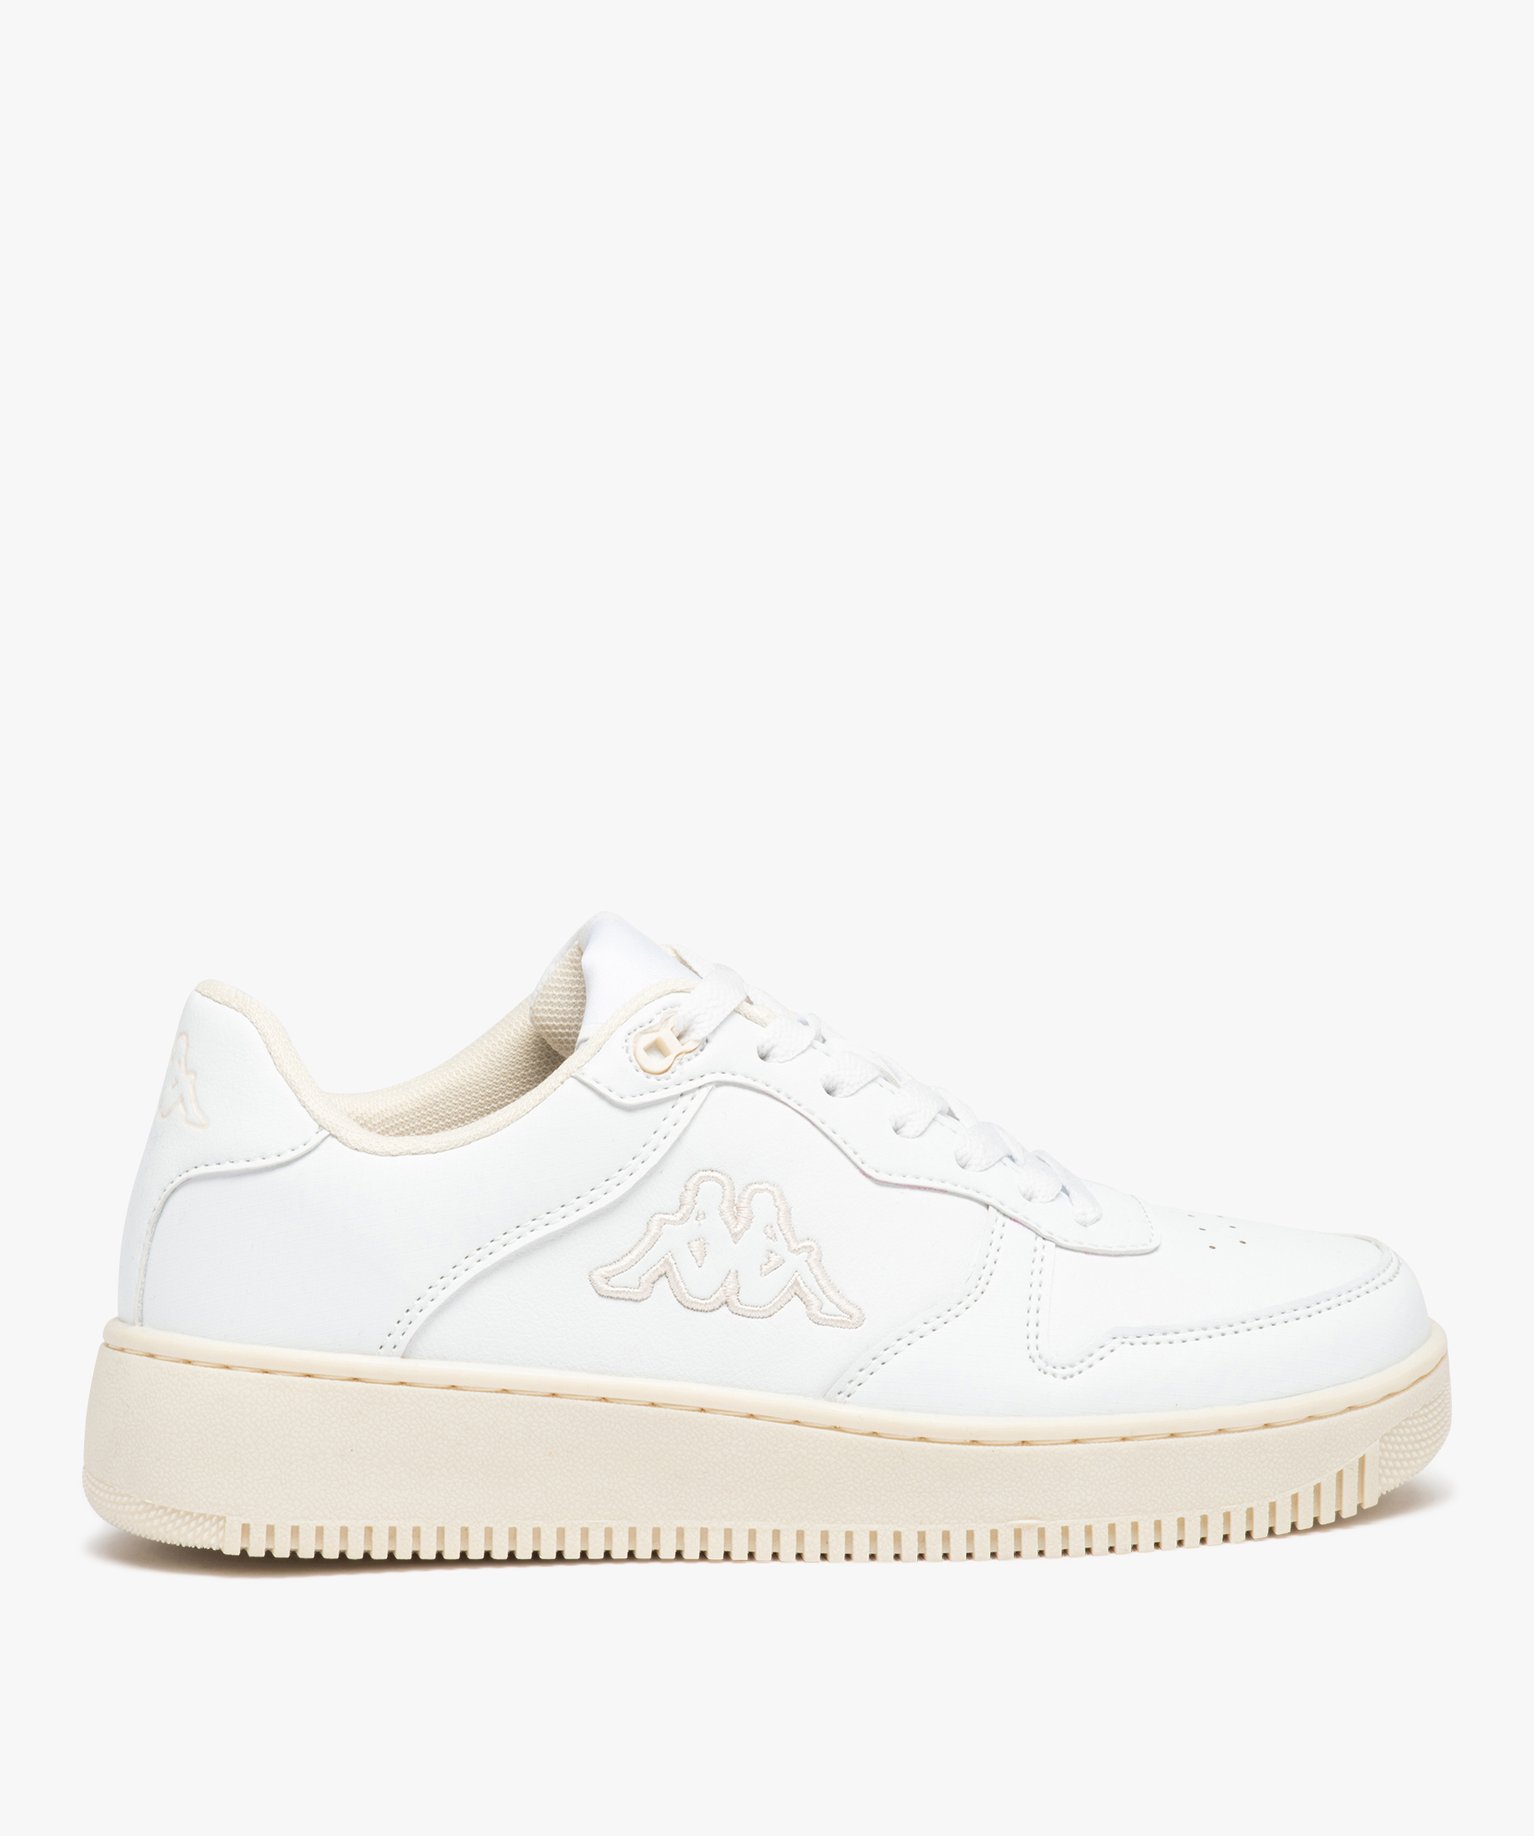 baskets femme unies style retro a lacets - kappa blanc